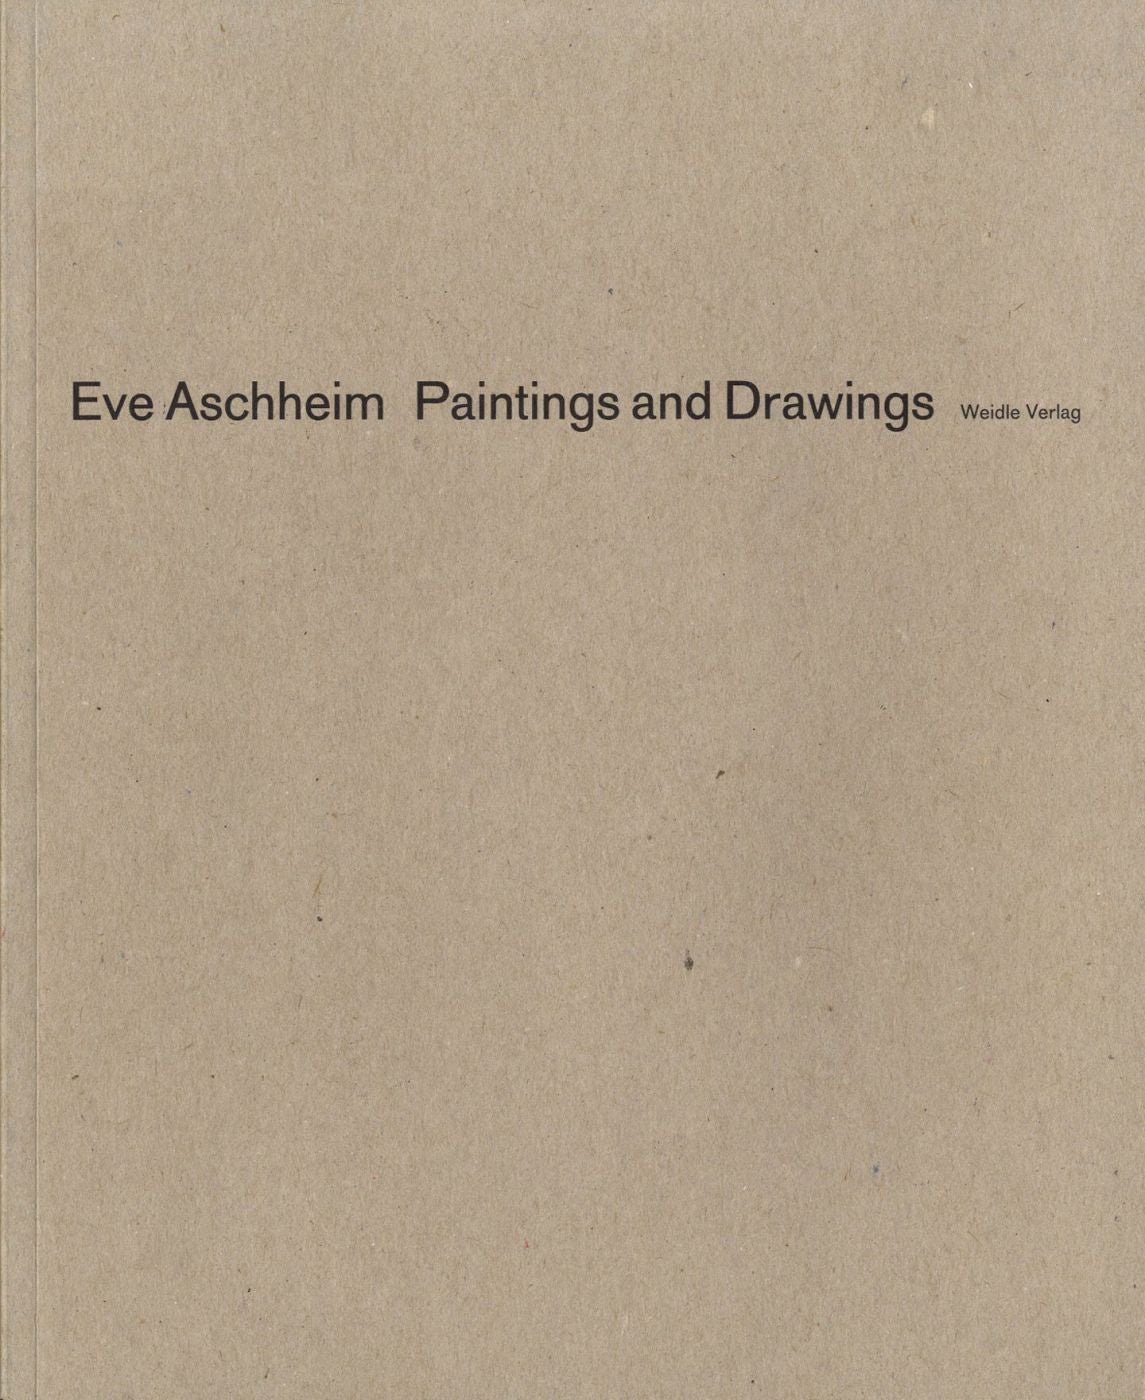 Eve Aschheim: Paintings and Drawings